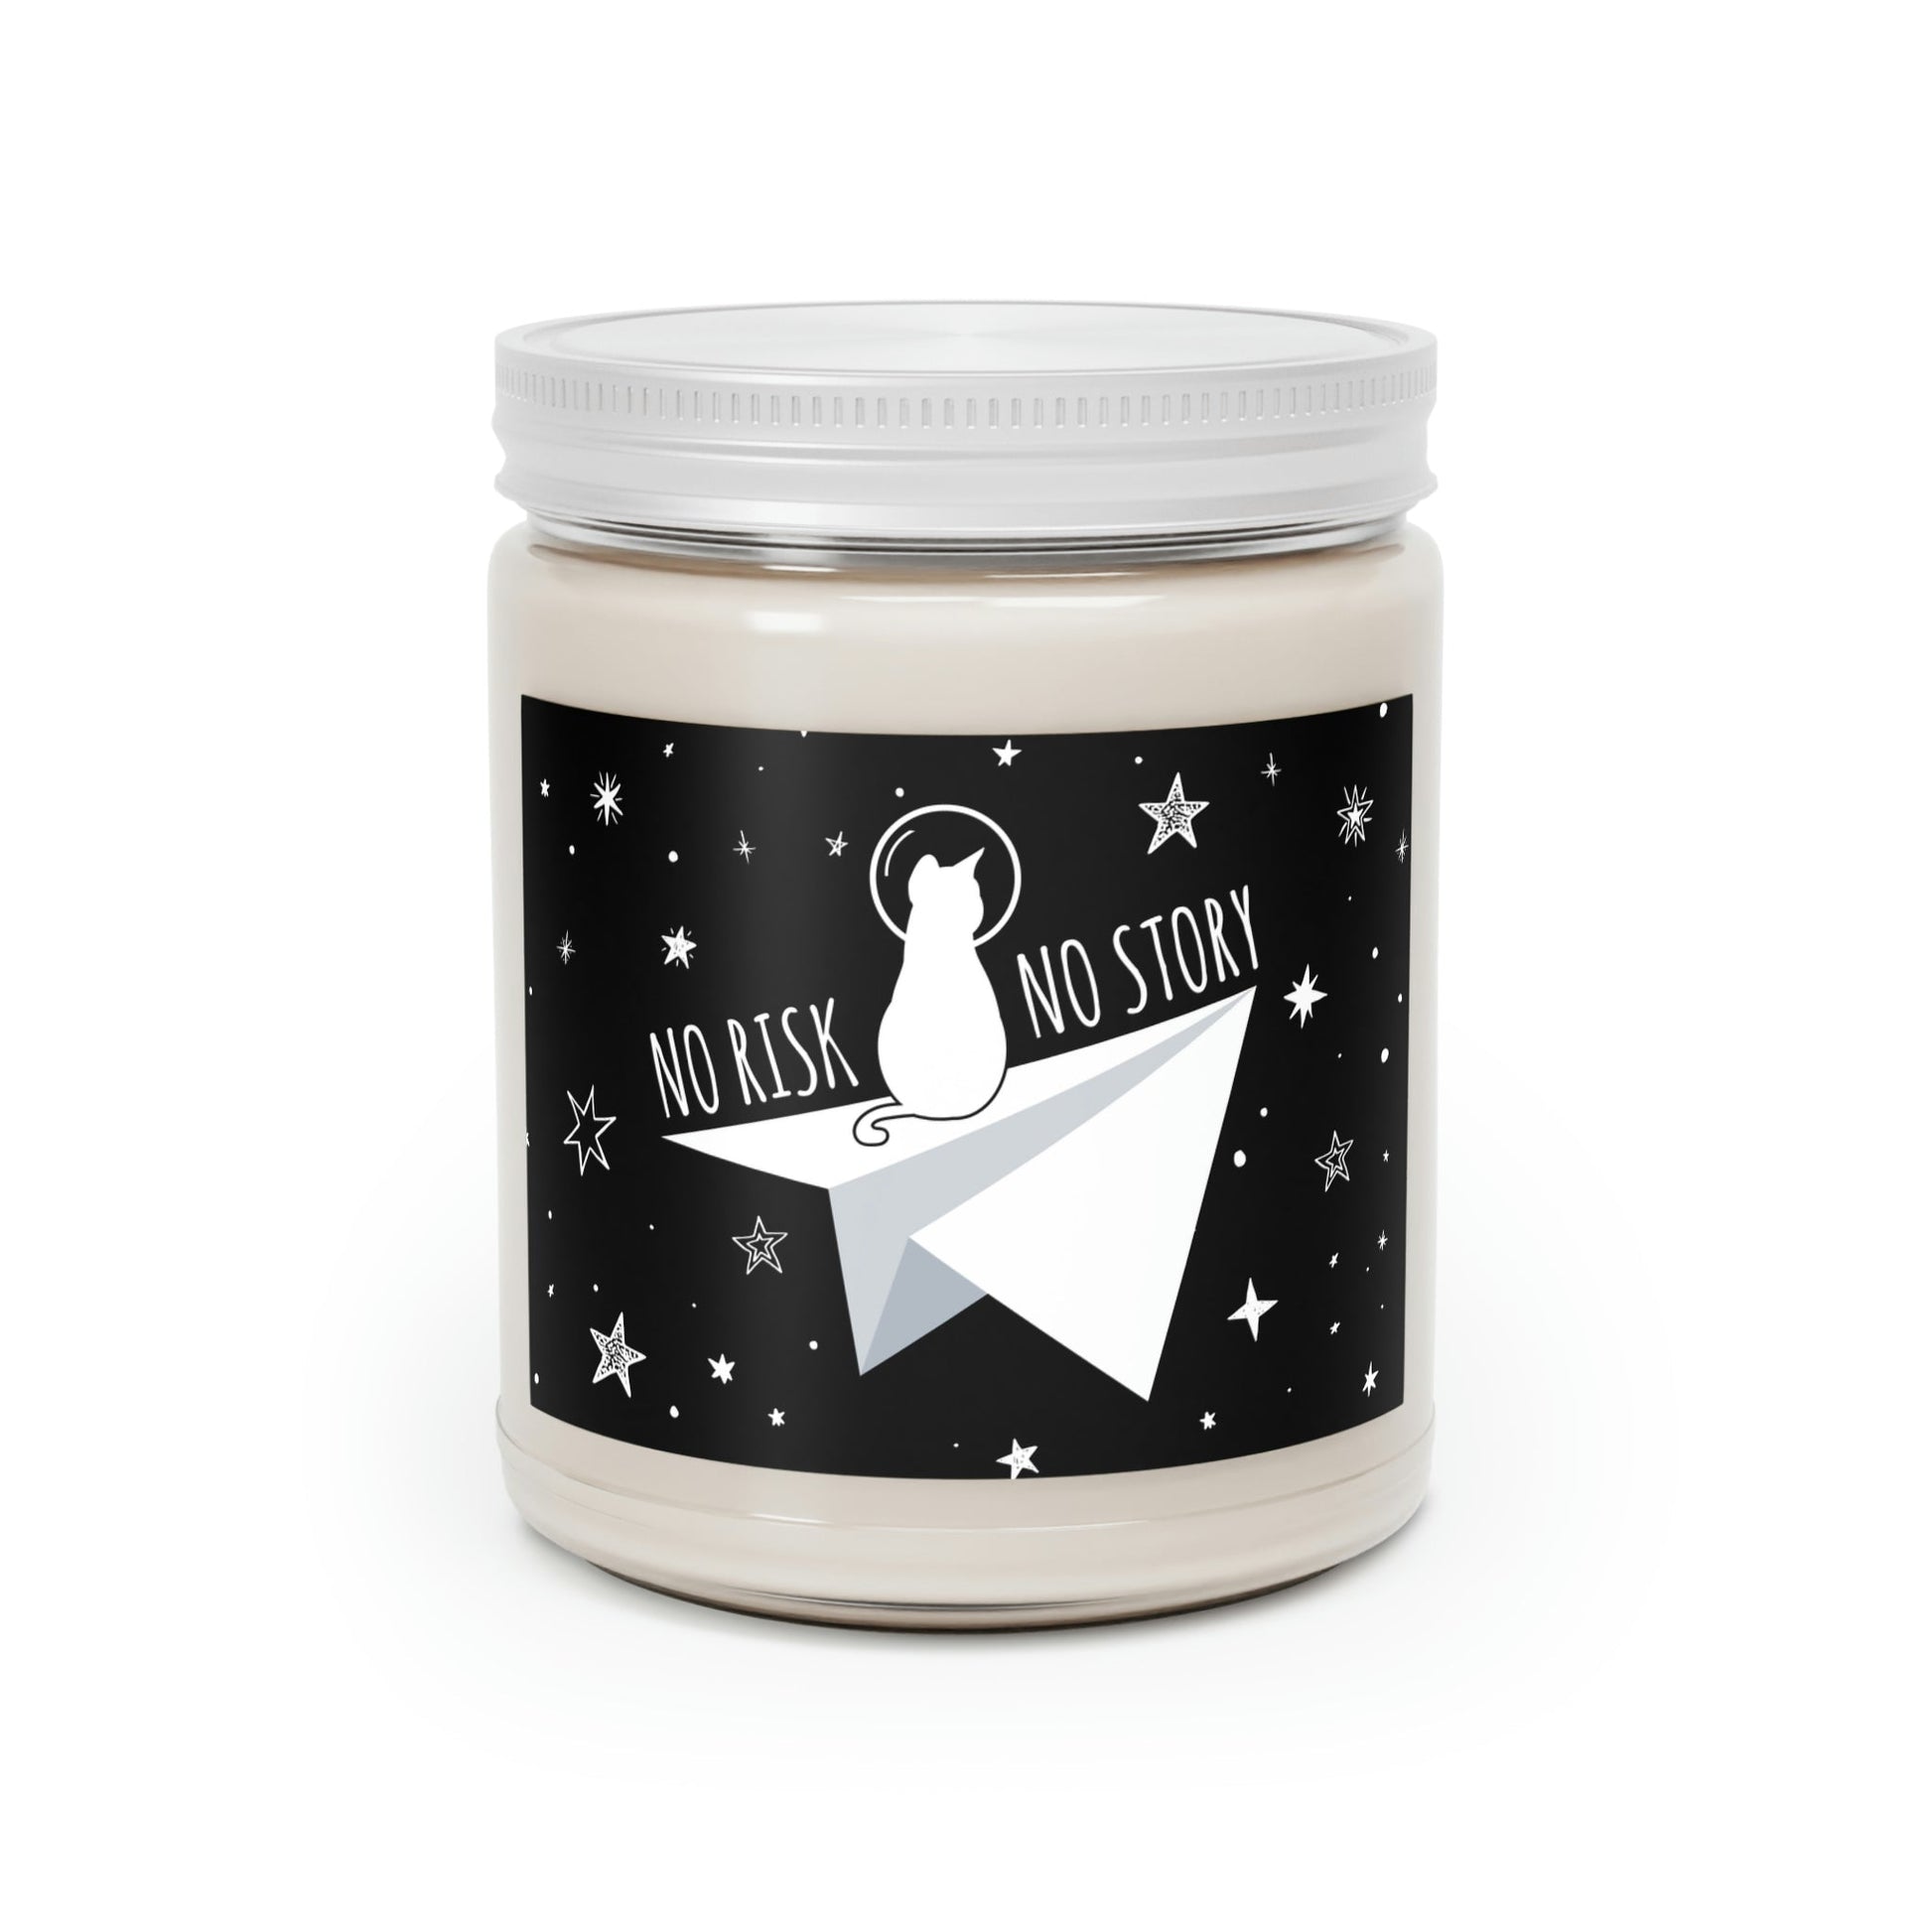 No risk No story Flying Galaxy Space Cat Astronaut Asteroid Art Scented Candle Up to 60hSoy Wax 9oz Ichaku [Perfect Gifts Selection]